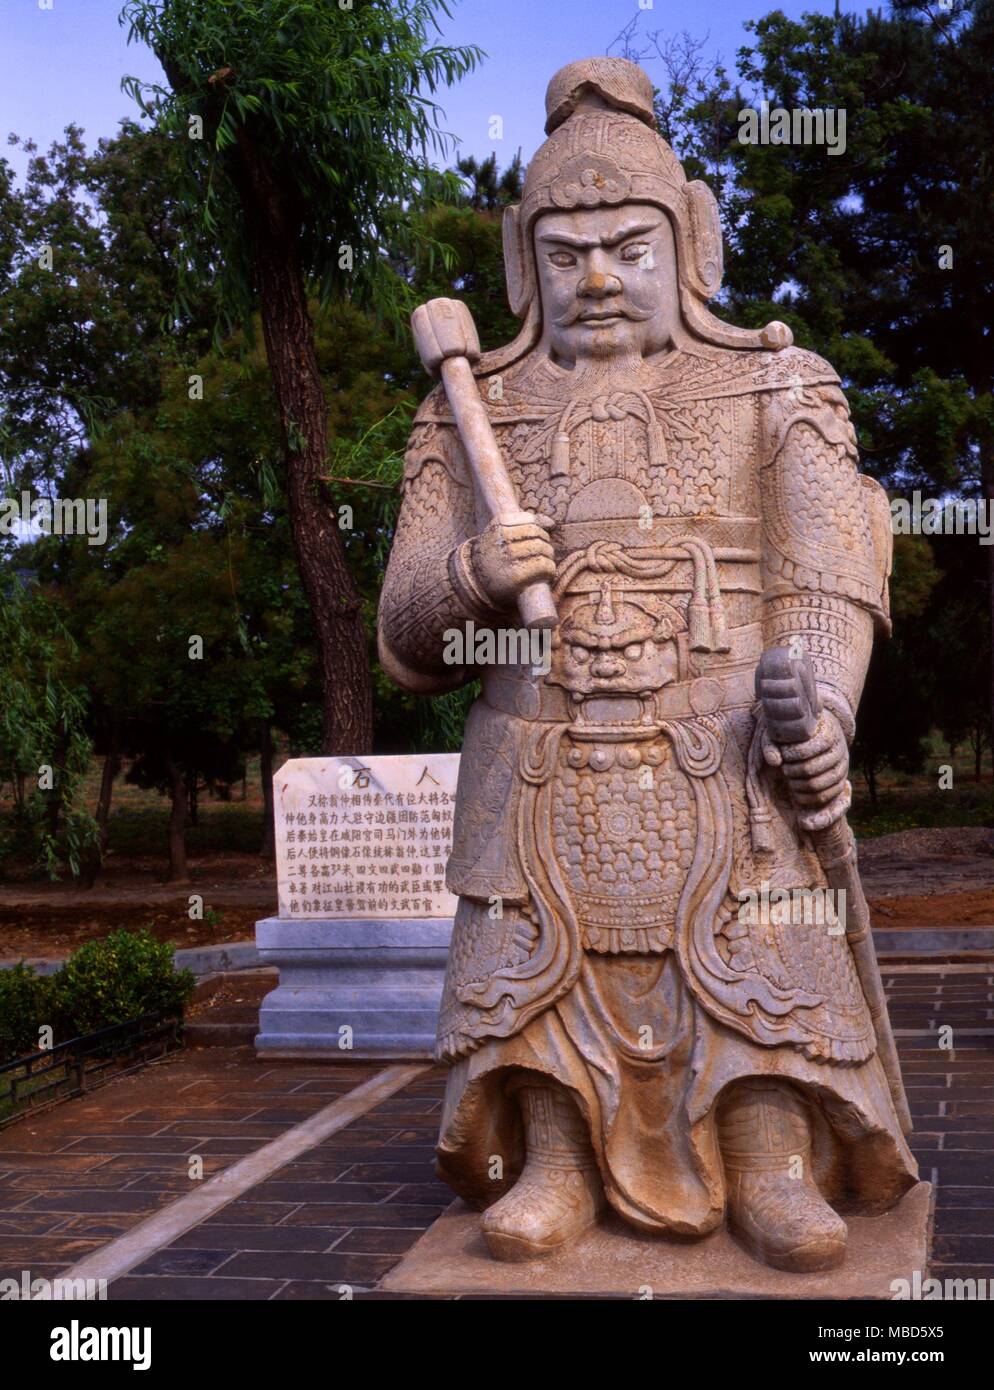 CHINA - MYTHOLOGICAL FIGURE, MING TOMBS, BEIJING. on the sacred way leading to the Ming Tombs, Bejing. Stock Photo